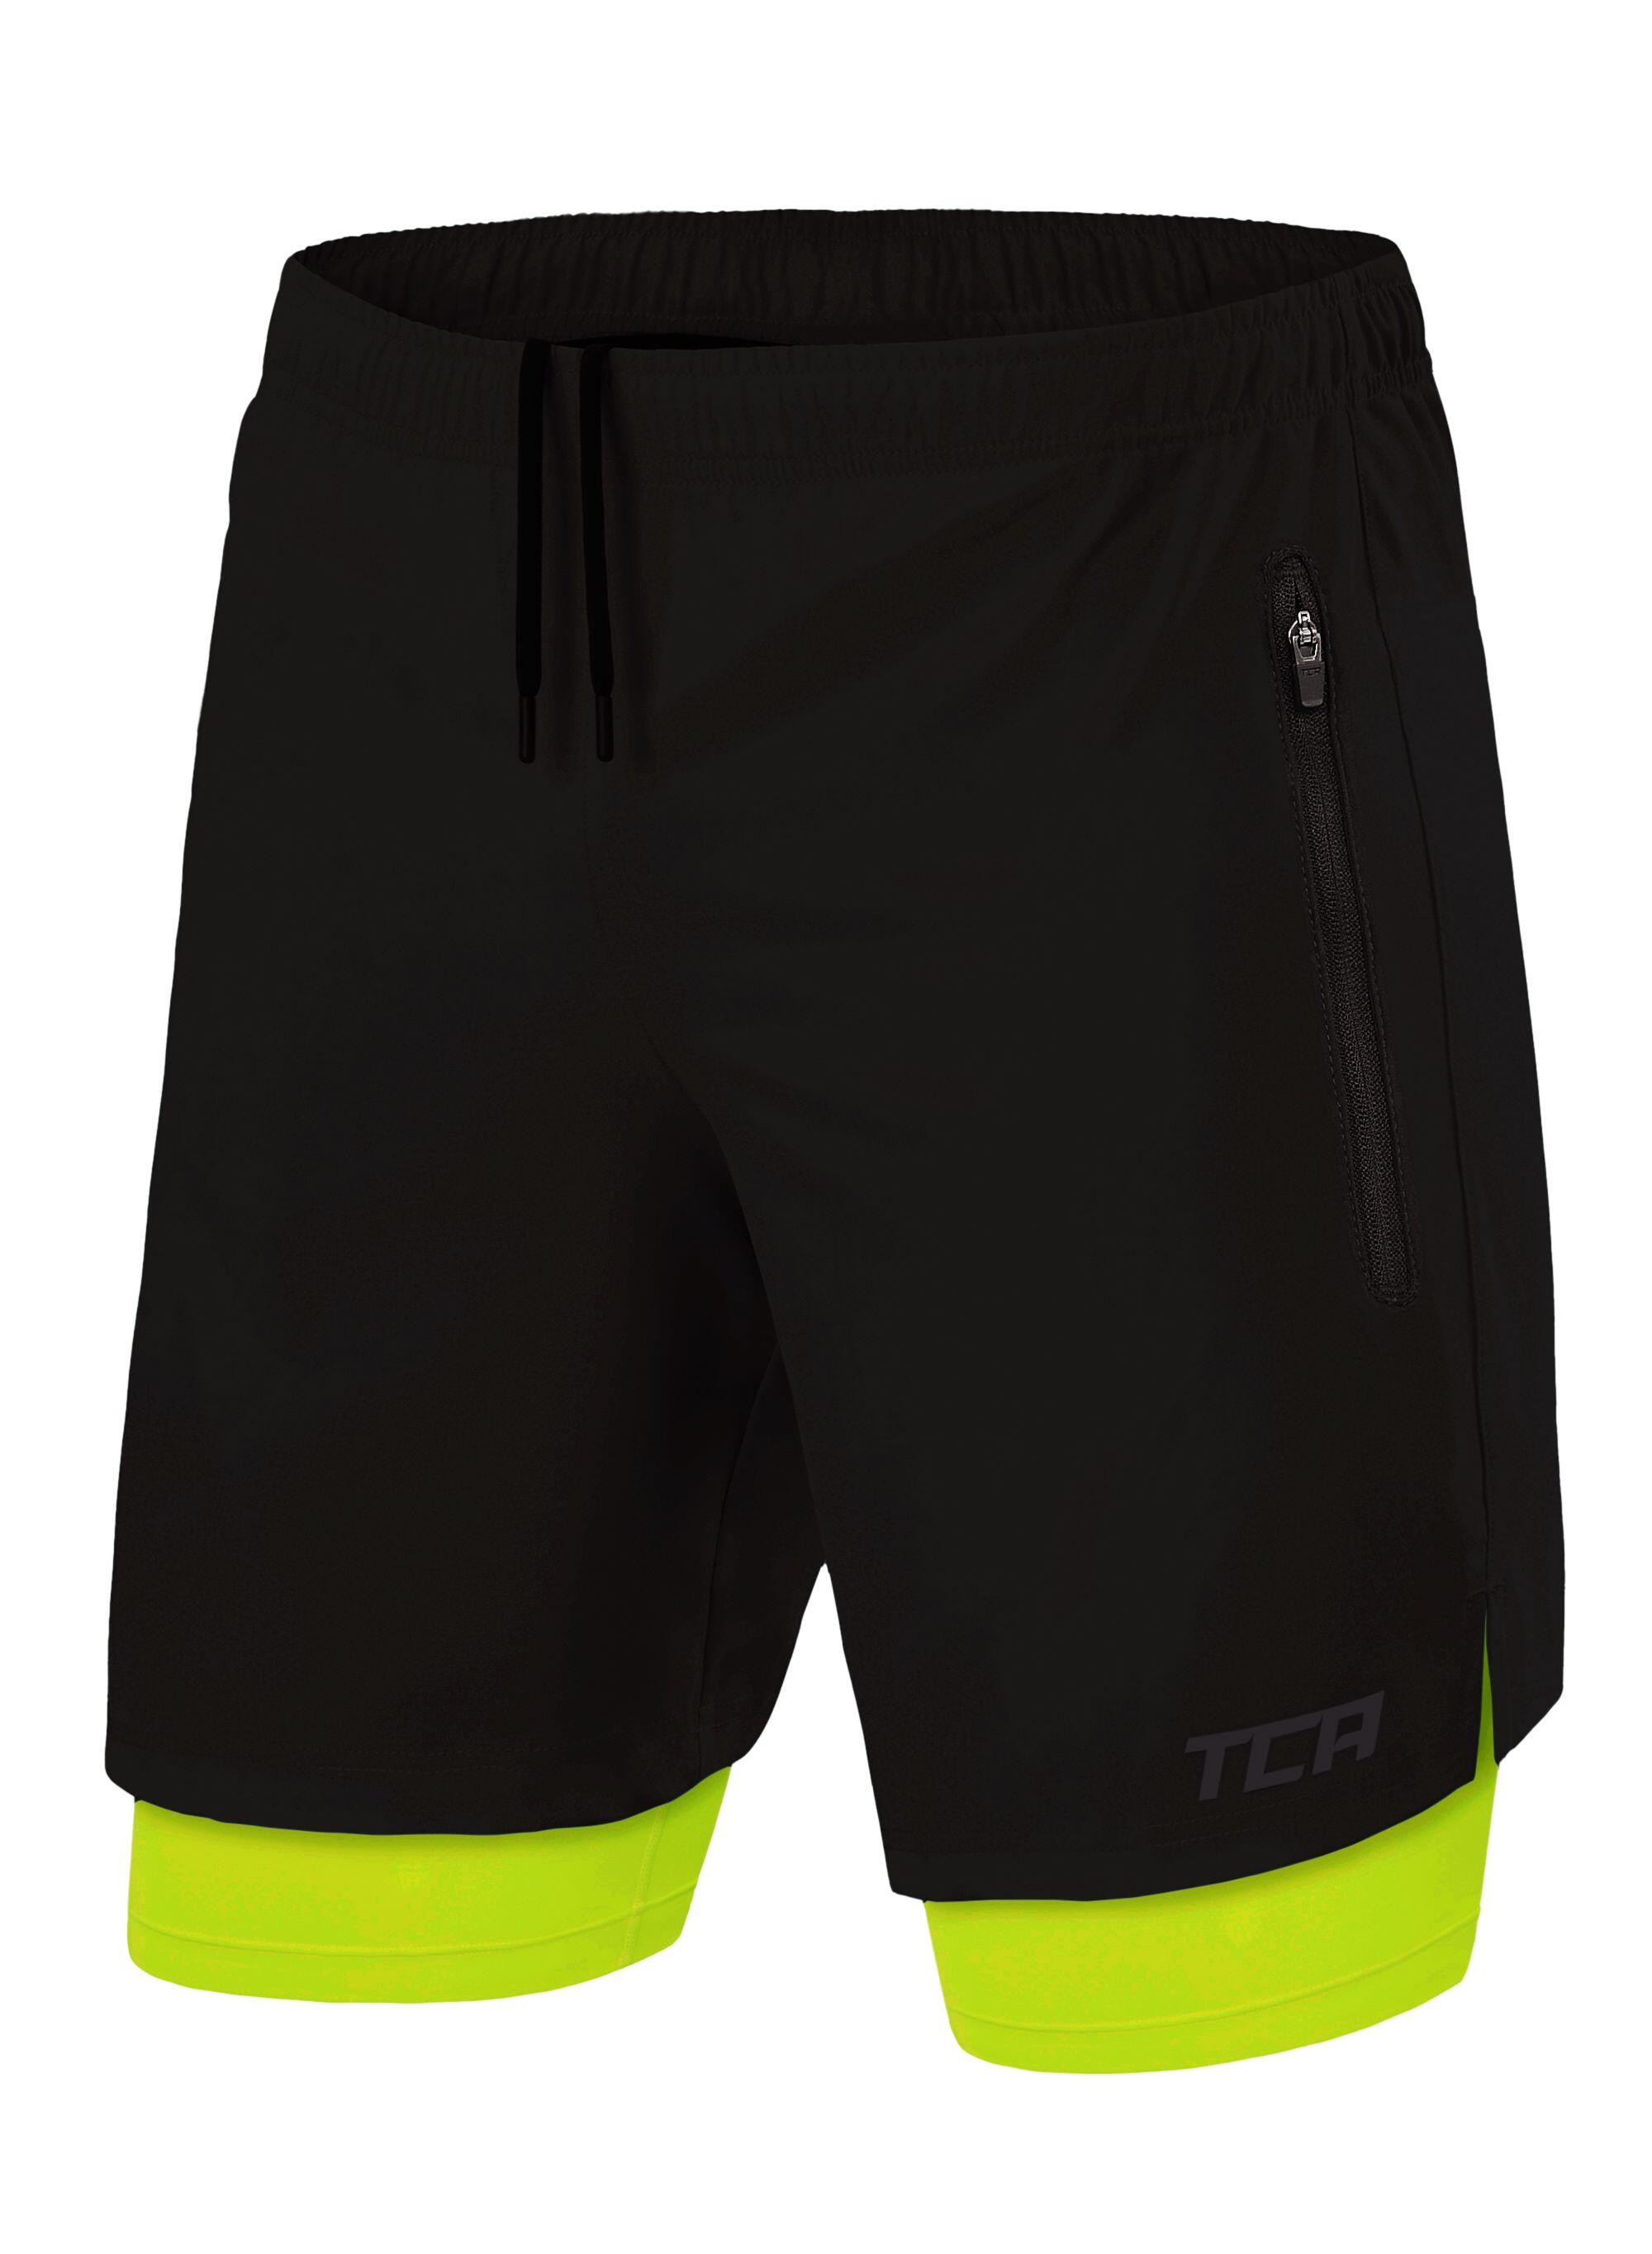 TCA Men's Ultra 2-in-1 Running Shorts with Zip Pockets - Black/Lime Punch